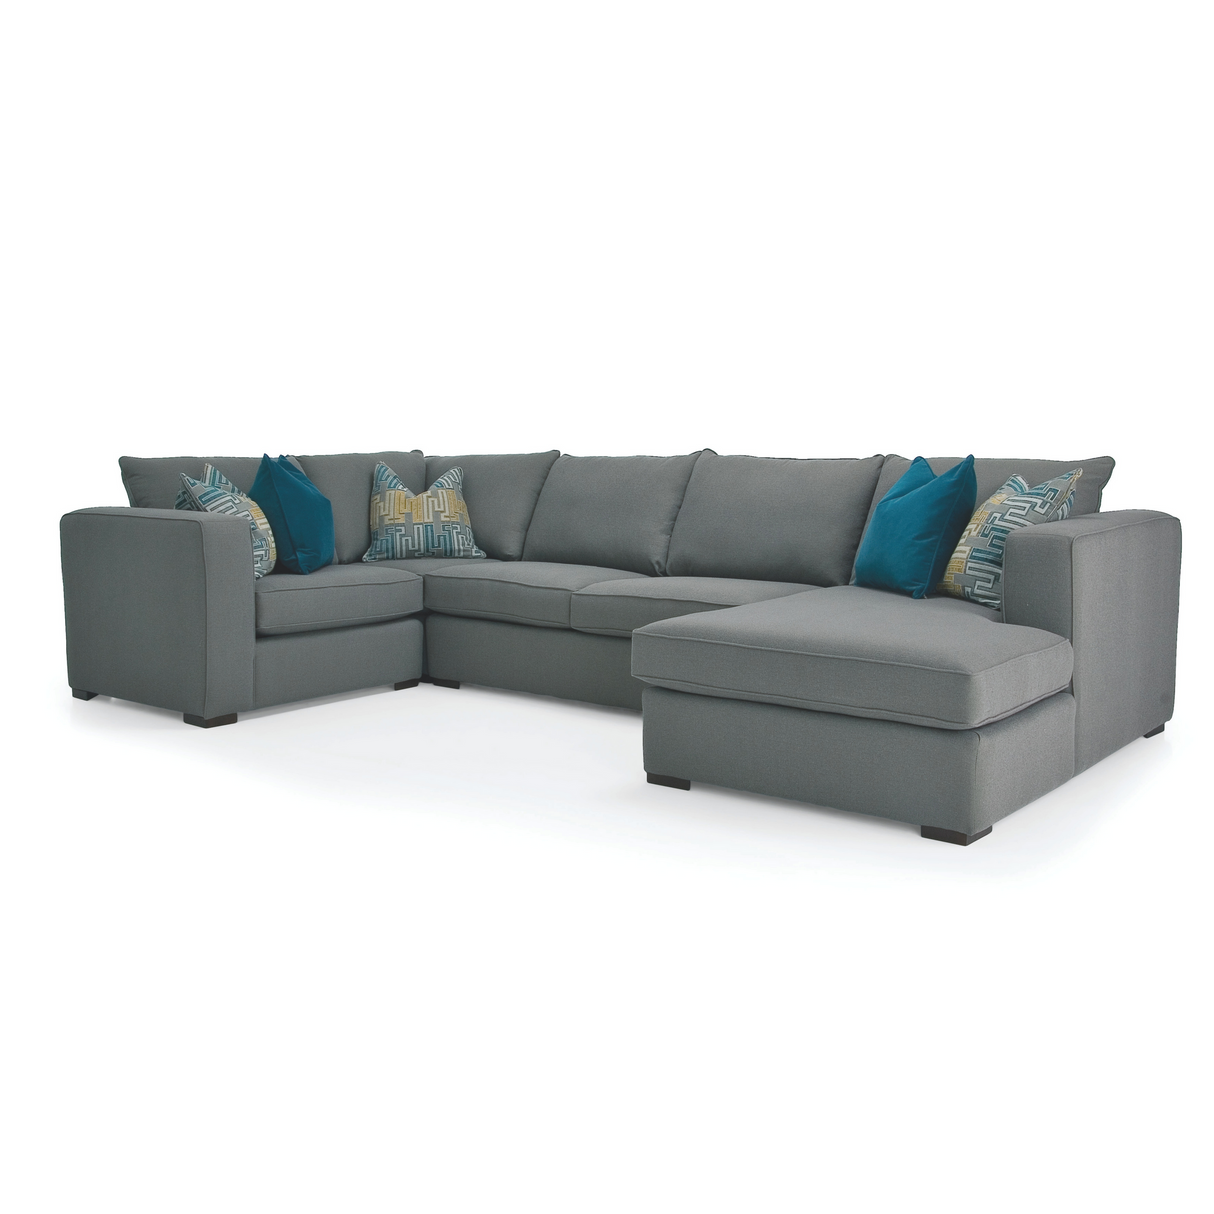 NEW YORK SECTIONAL